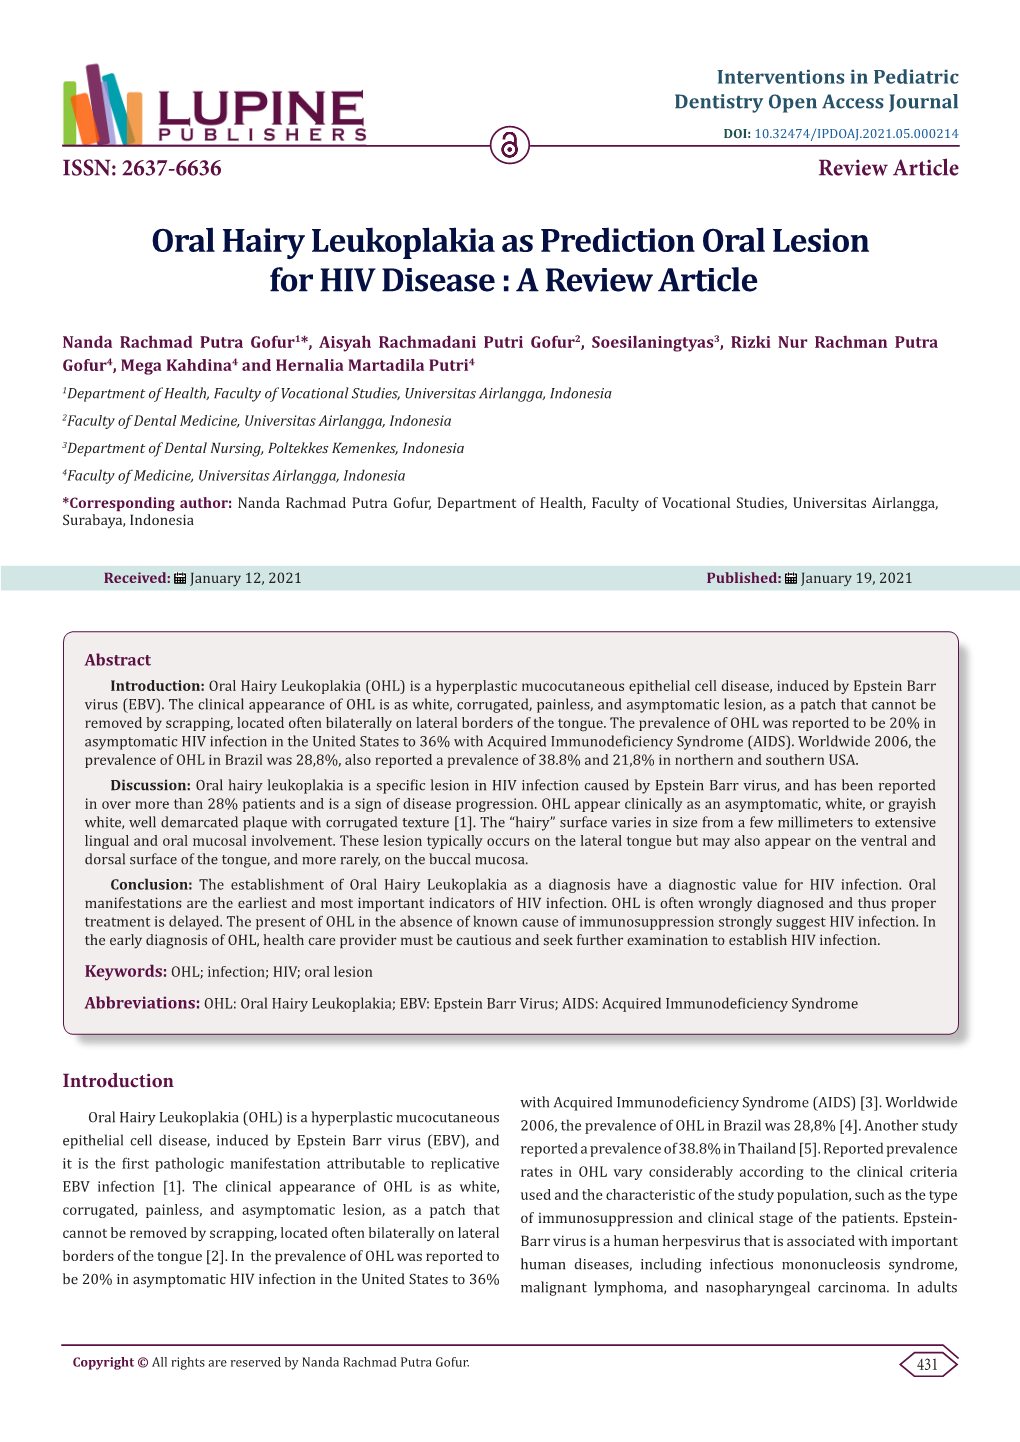 Oral Hairy Leukoplakia As Prediction Oral Lesion for HIV Disease : a Review Article